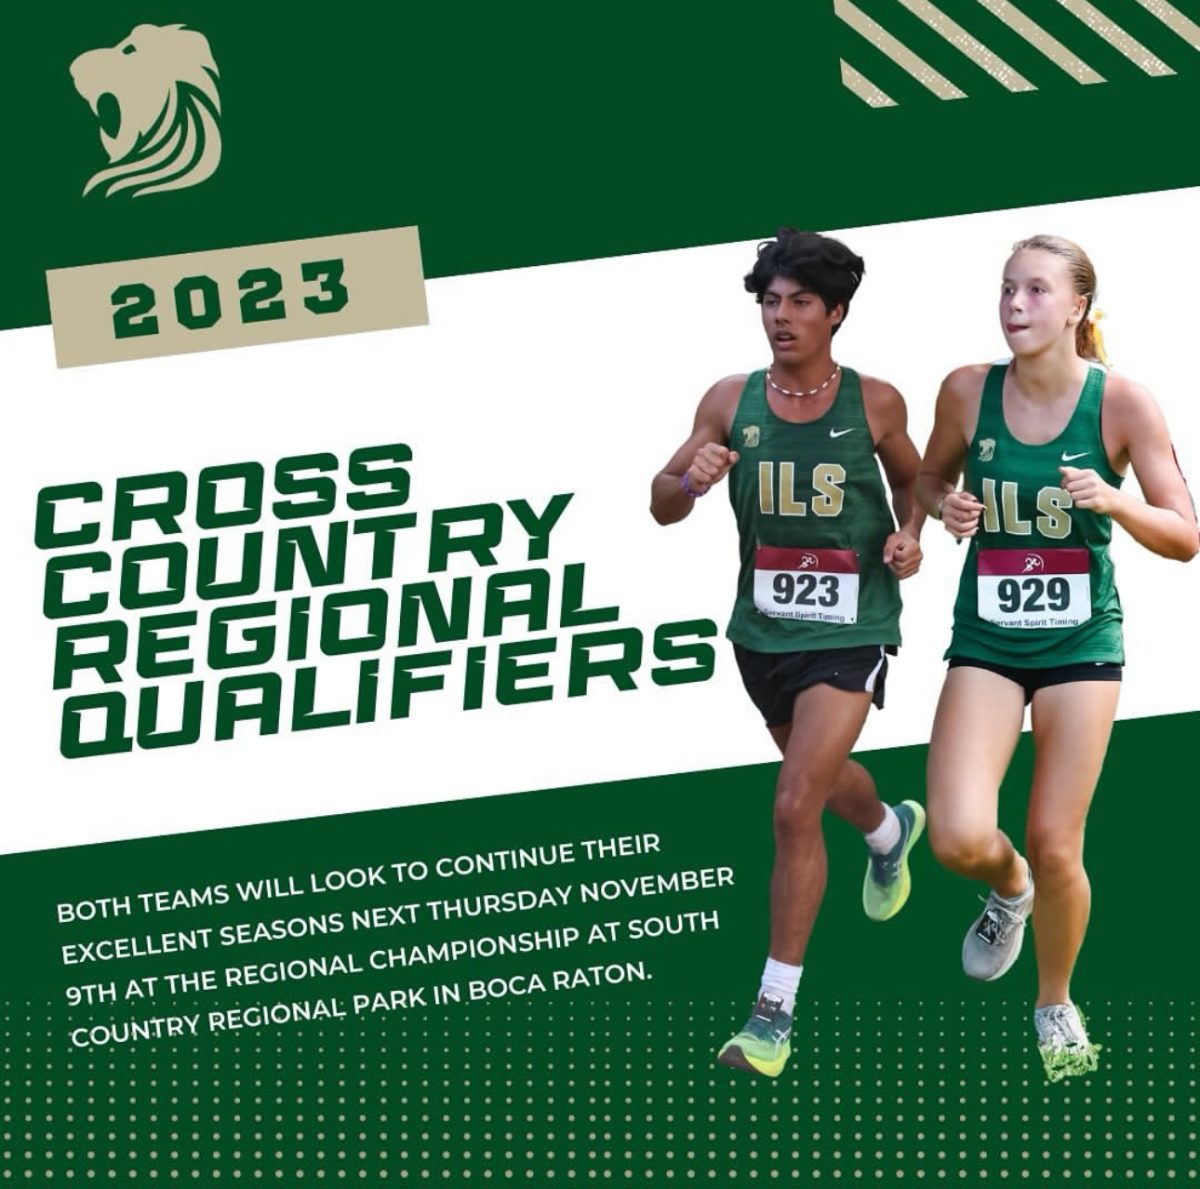 This display poster announces the recent success of the cross country team.